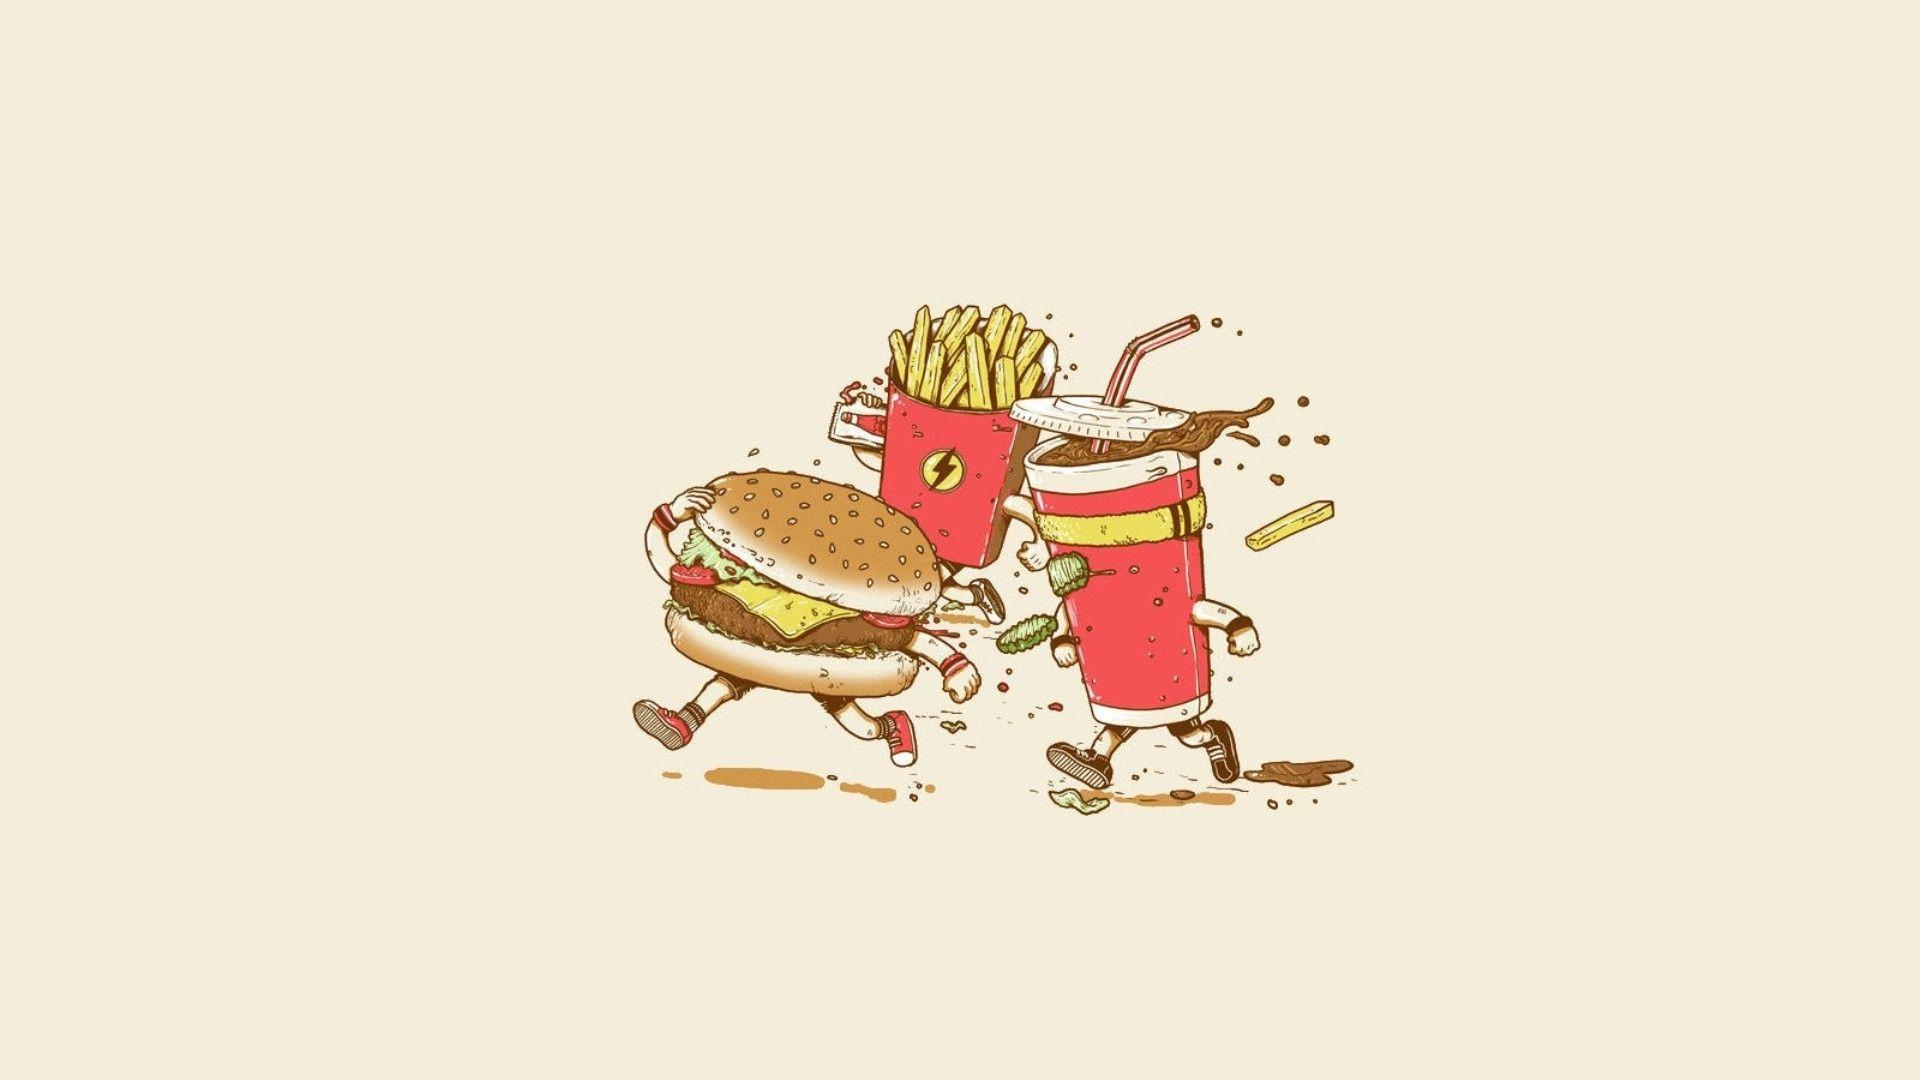 Anime Food Aesthetic Wallpapers - Wallpaper Cave